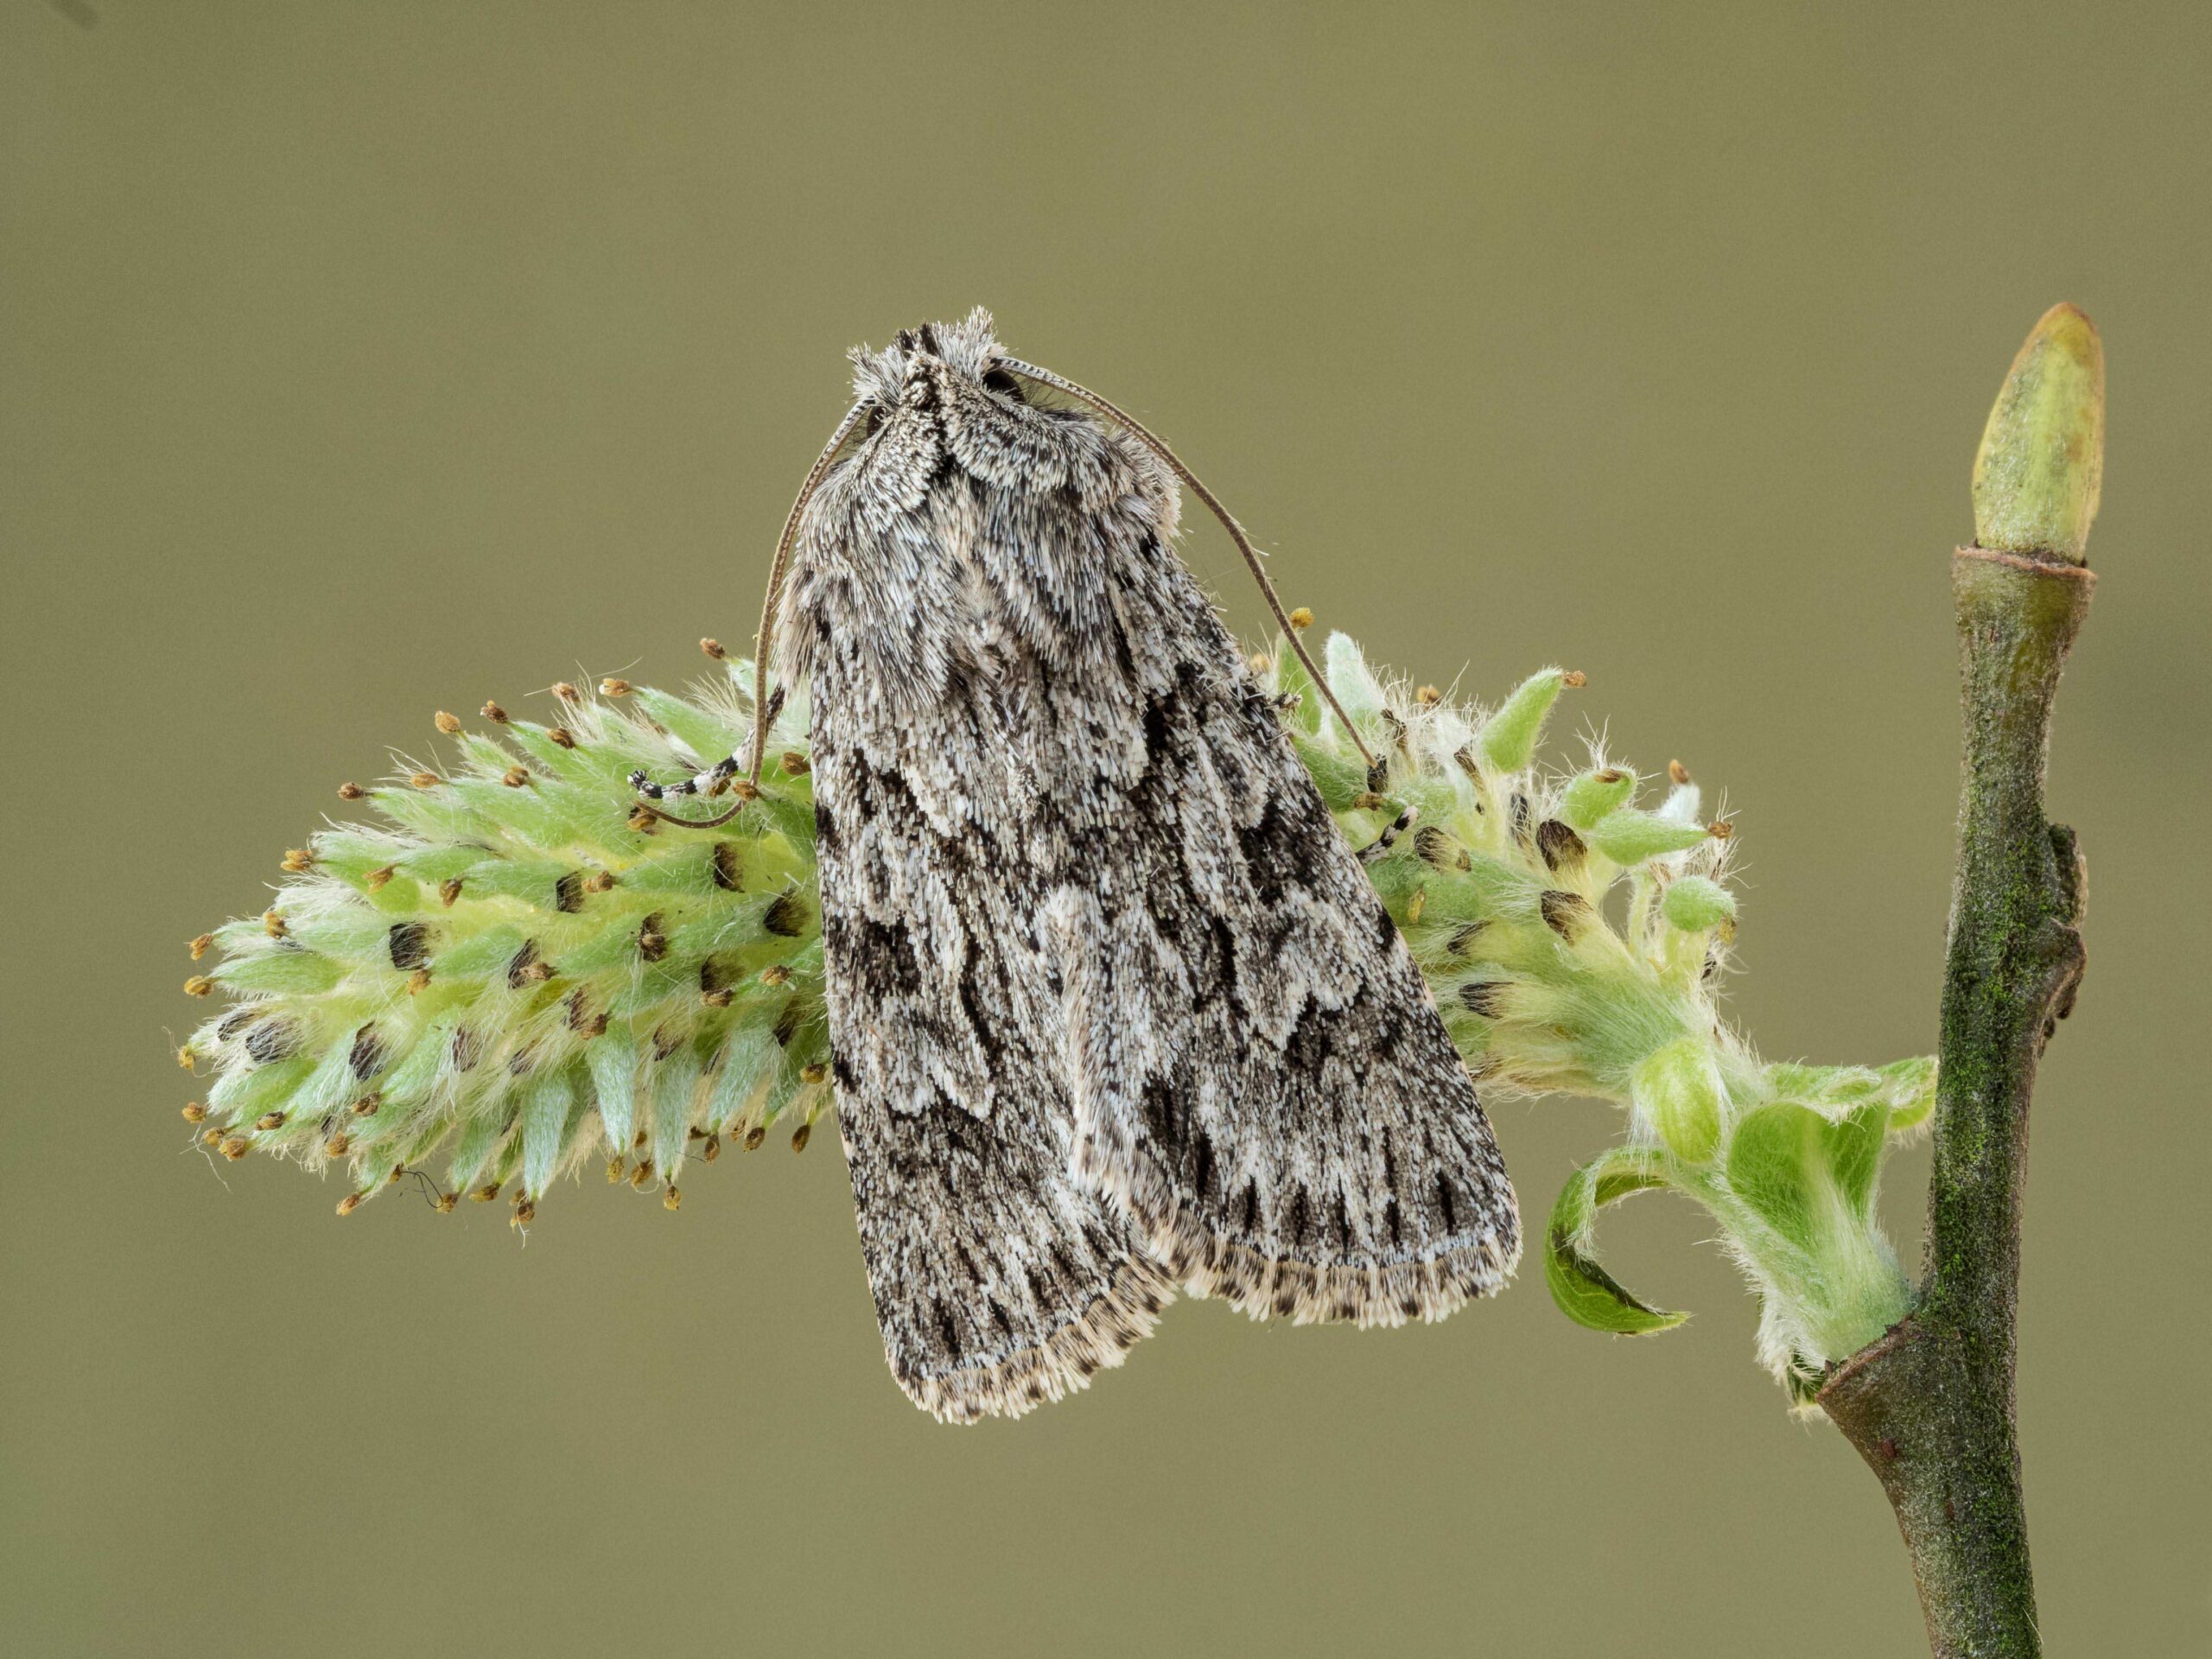 Natural History Image of the Year - Early Grey on Willow by Alan Hartley